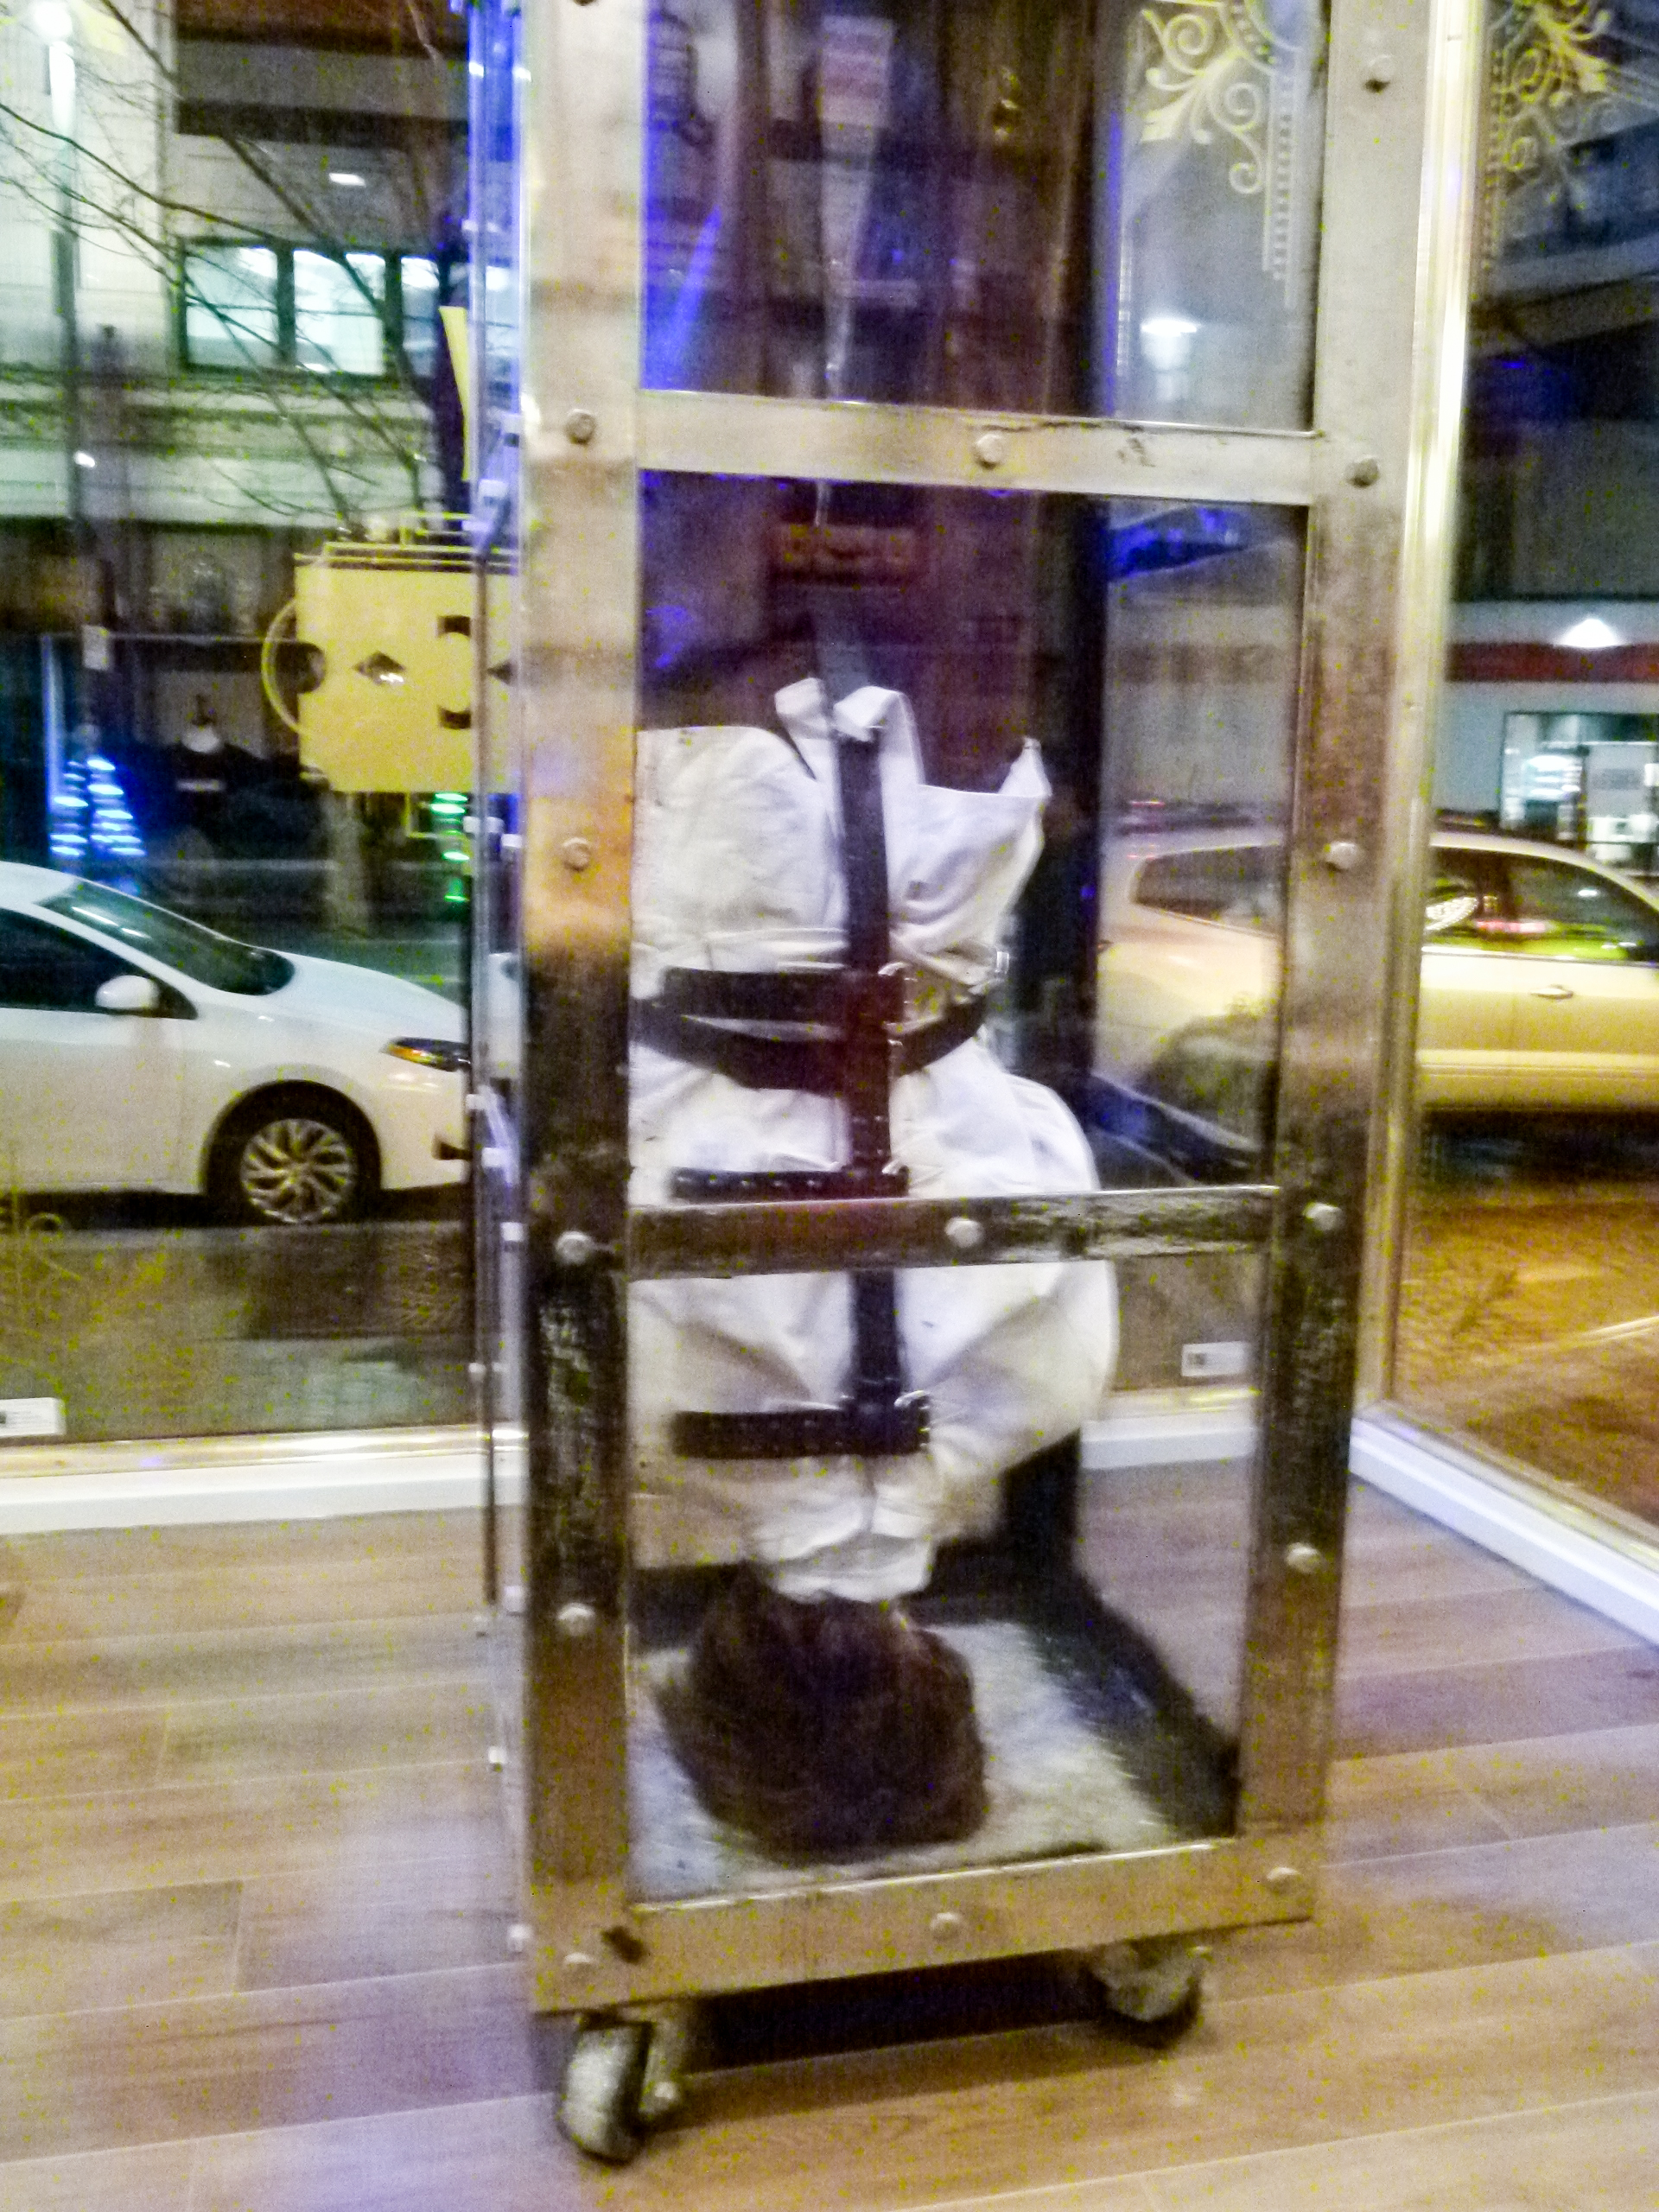 The straitjacketed mannequin hanging upside down in the front window.